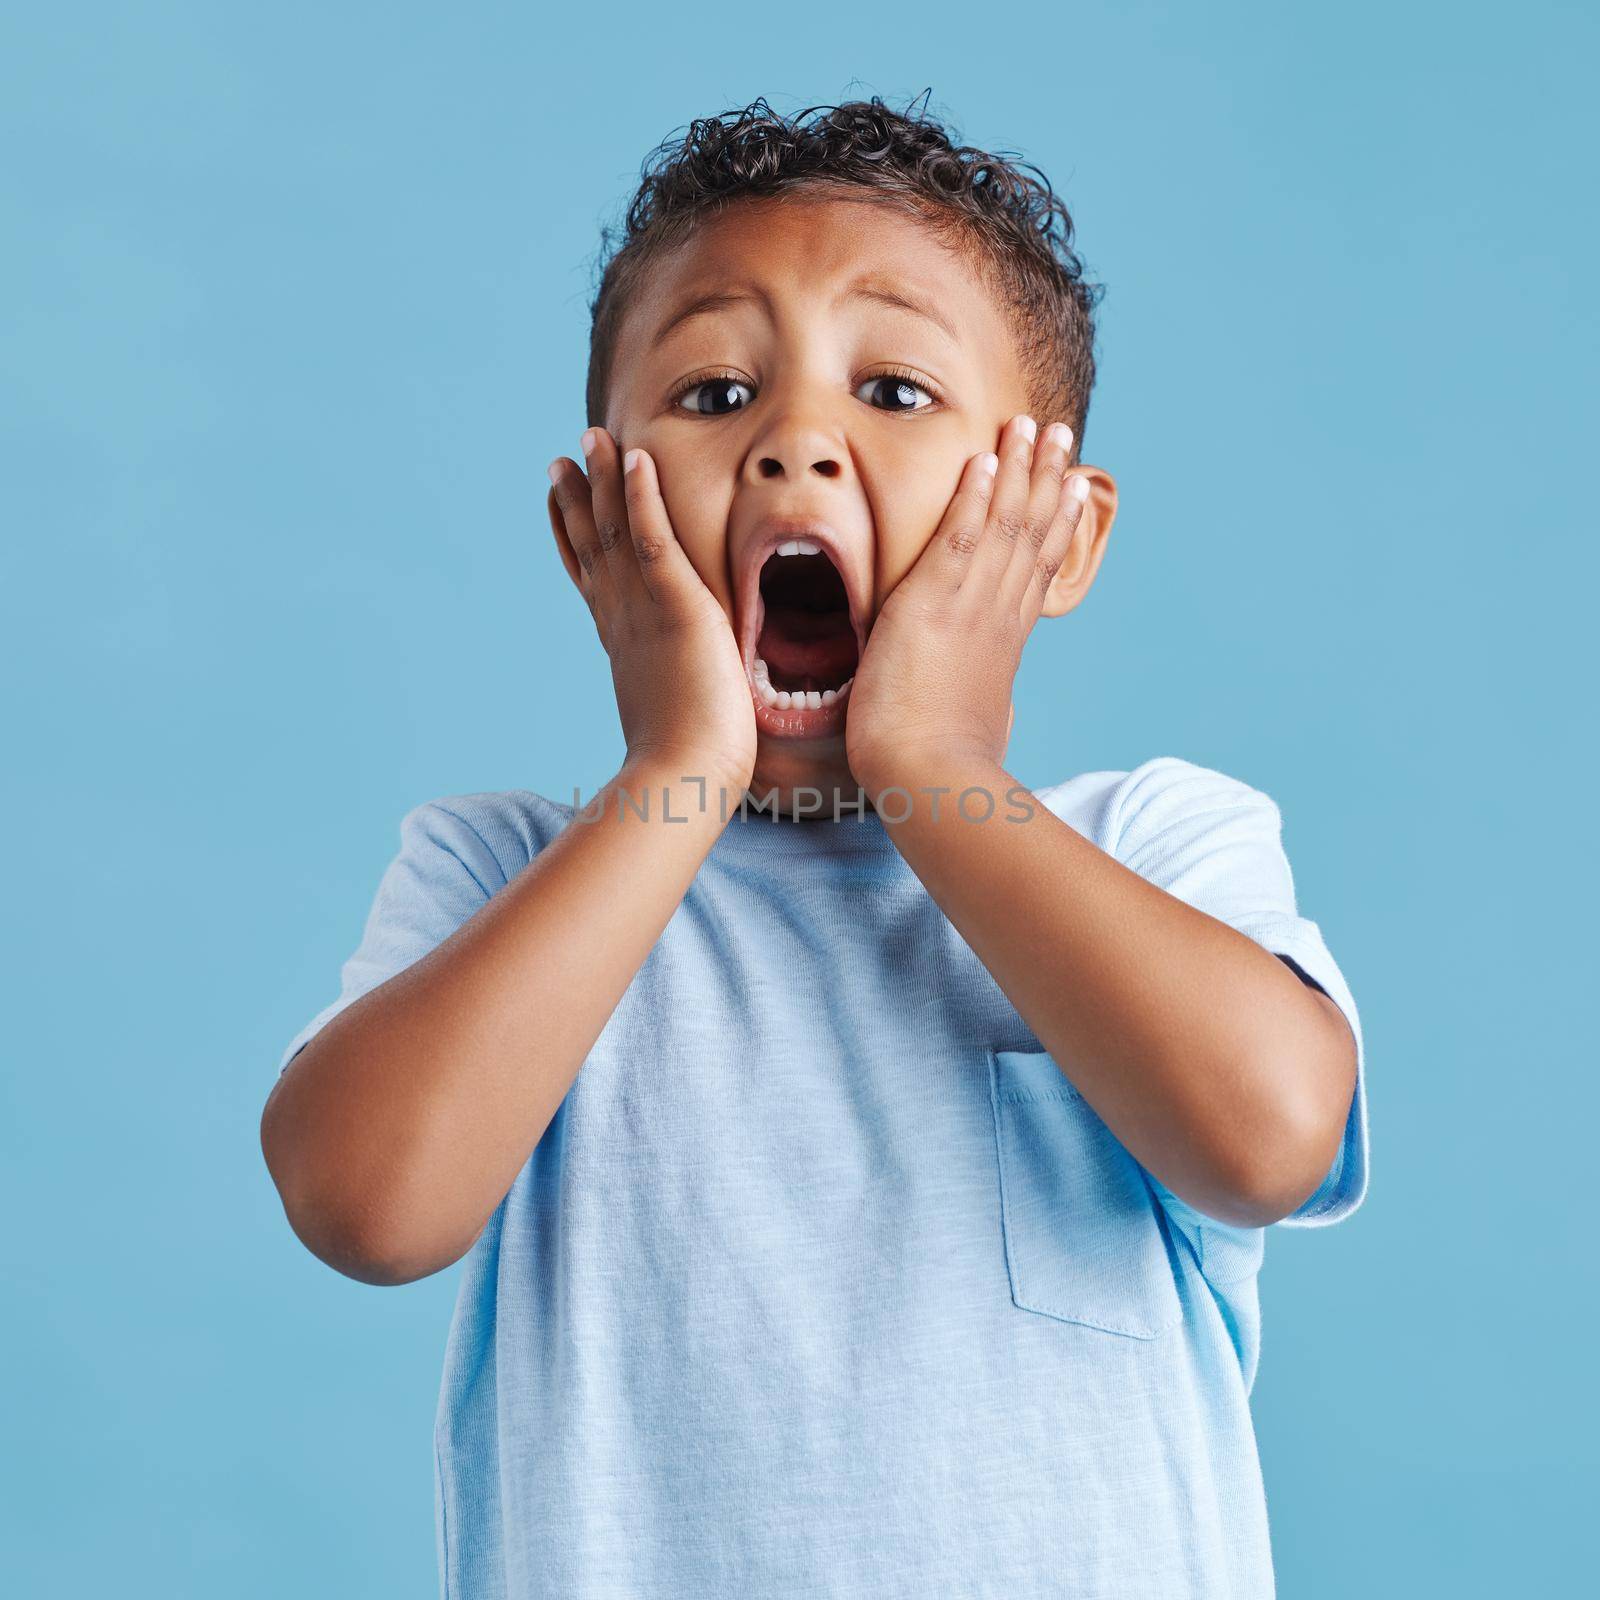 Adorable little hispanic boy with hands on face and mouth open looking terrified and shocked showing true astonished reaction against a blue studio background.